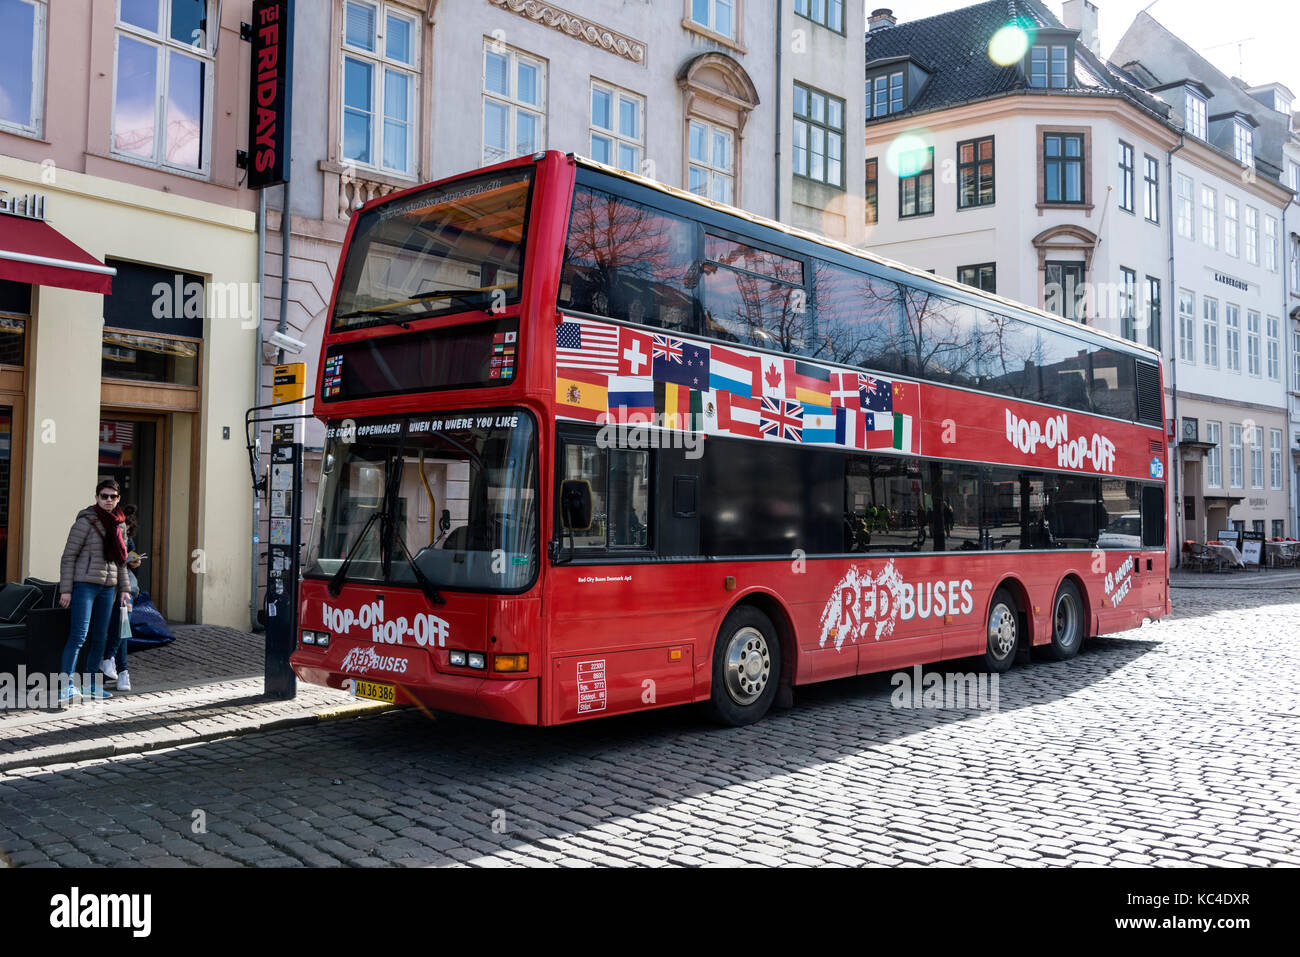 Copenhagen Bus High Resolution Stock Photography and Images - Alamy